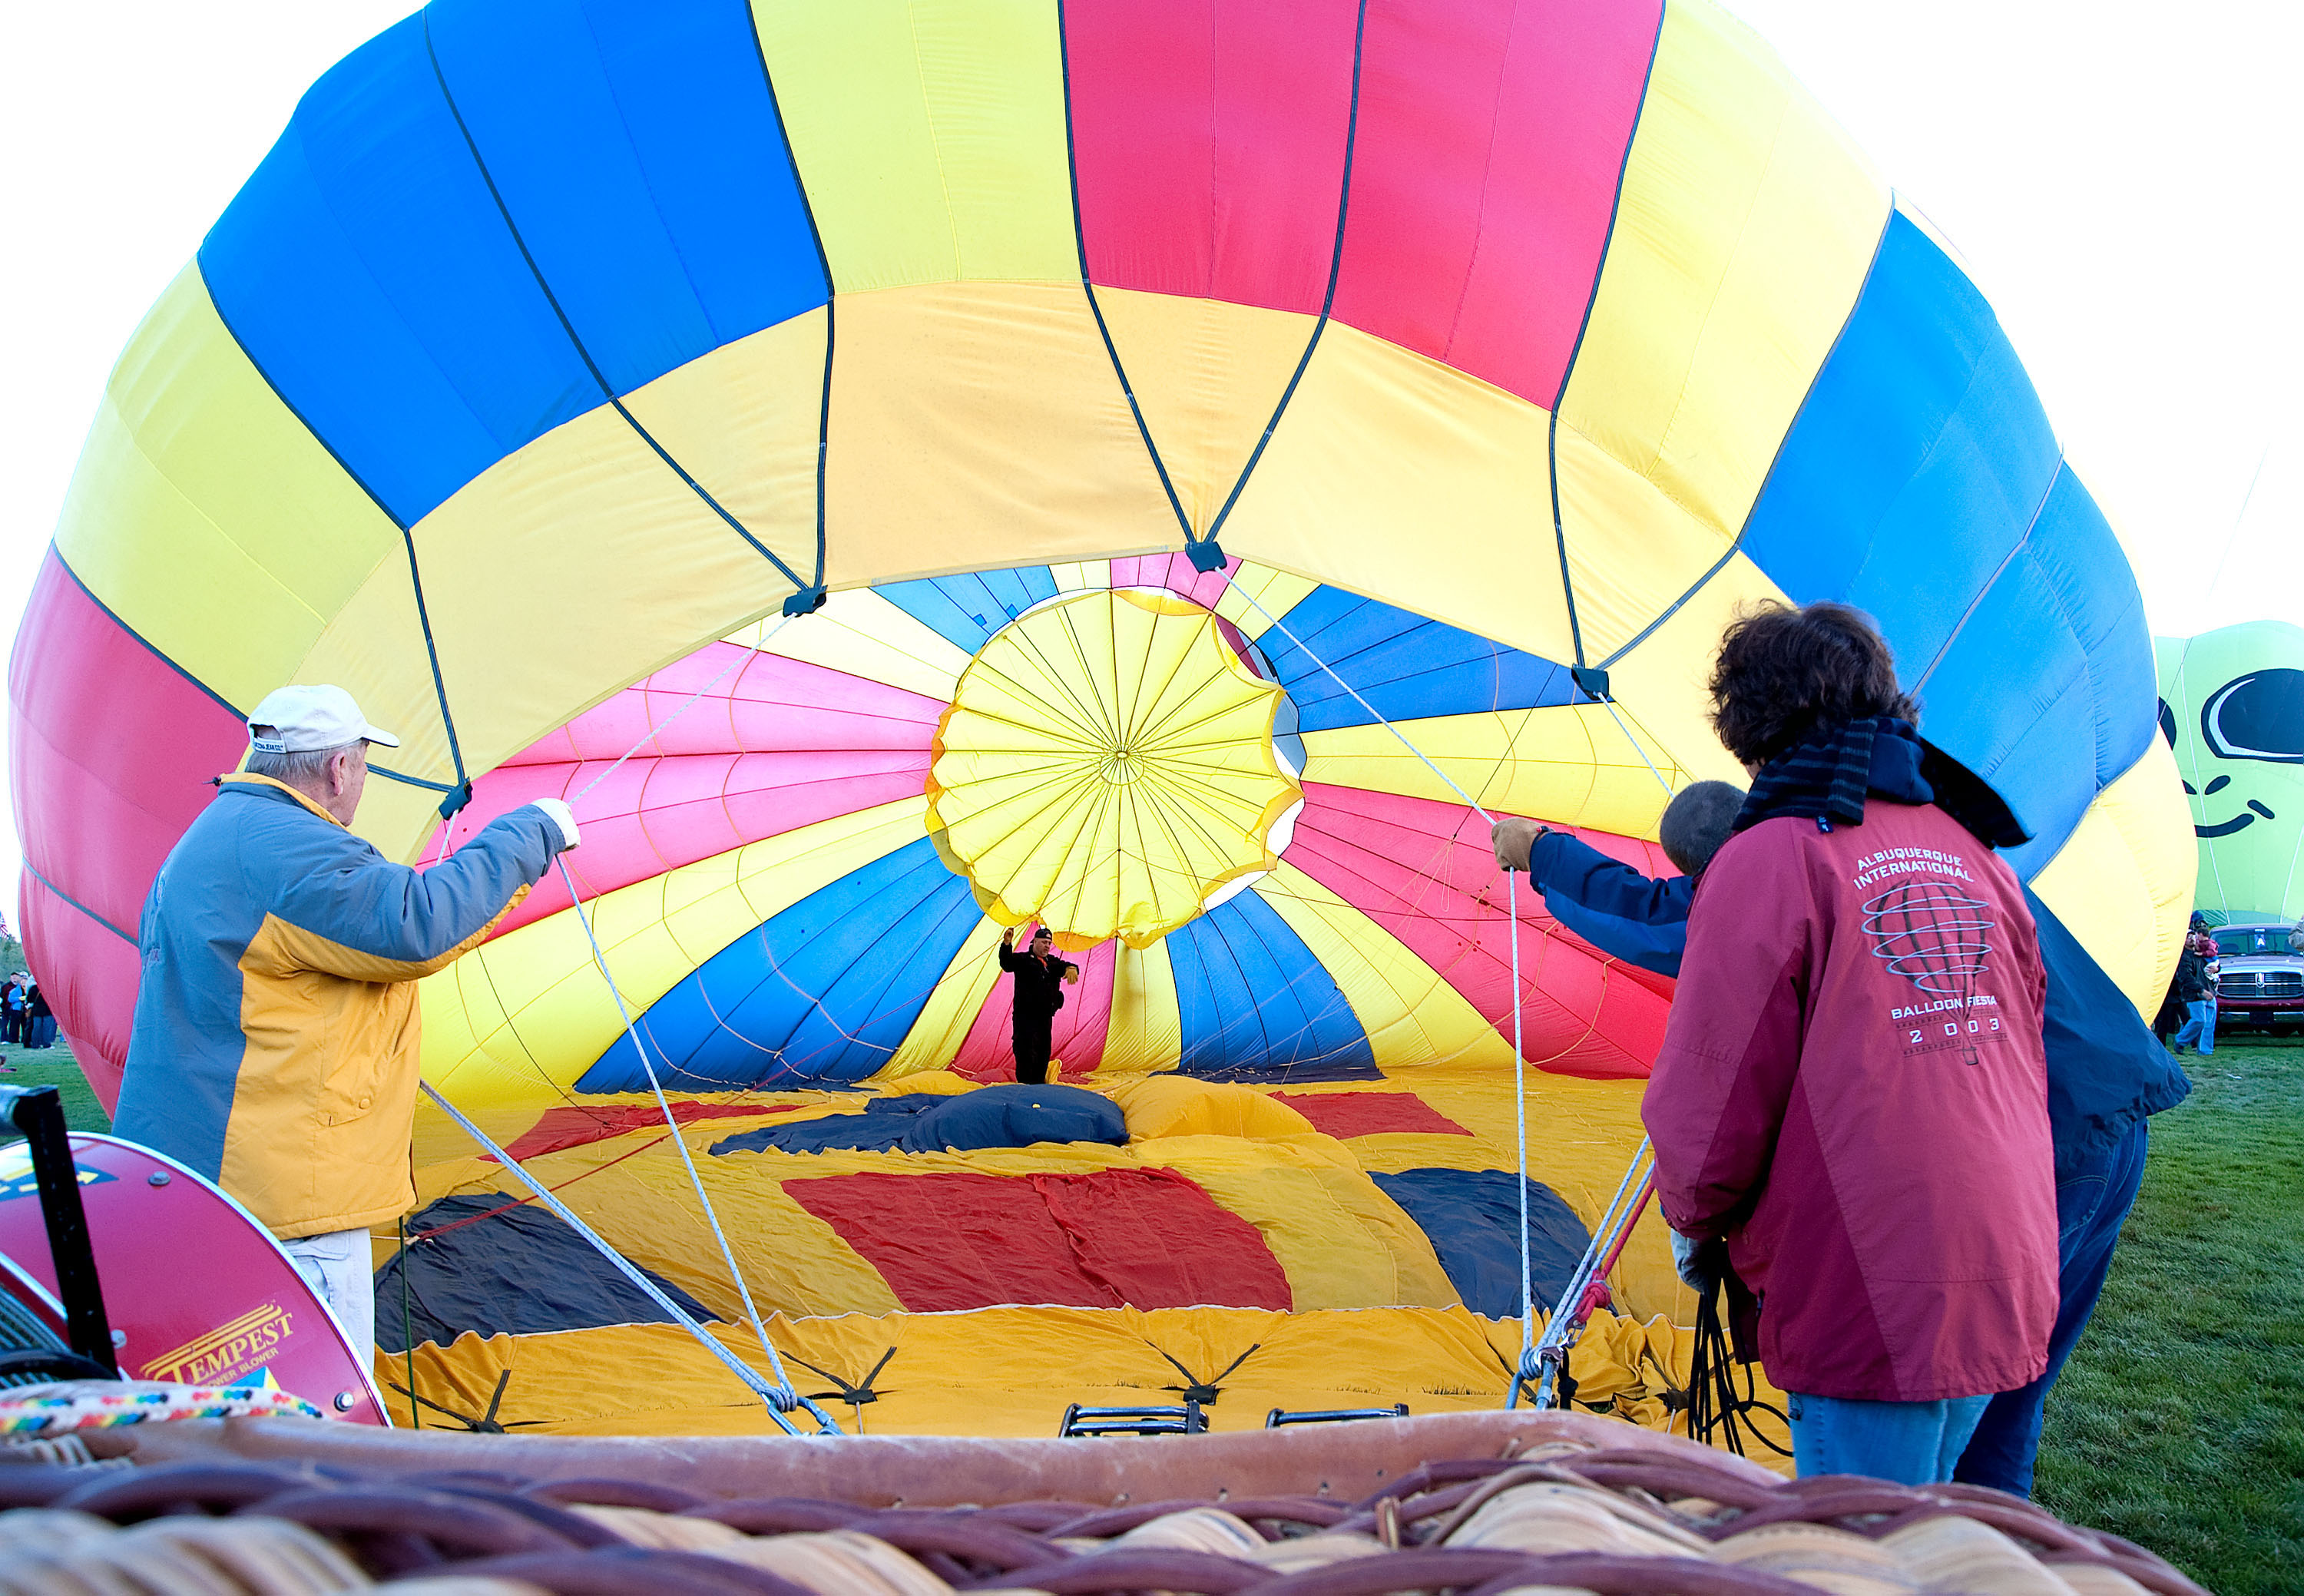 Balloon Festival This Weekend in Statesville, NC